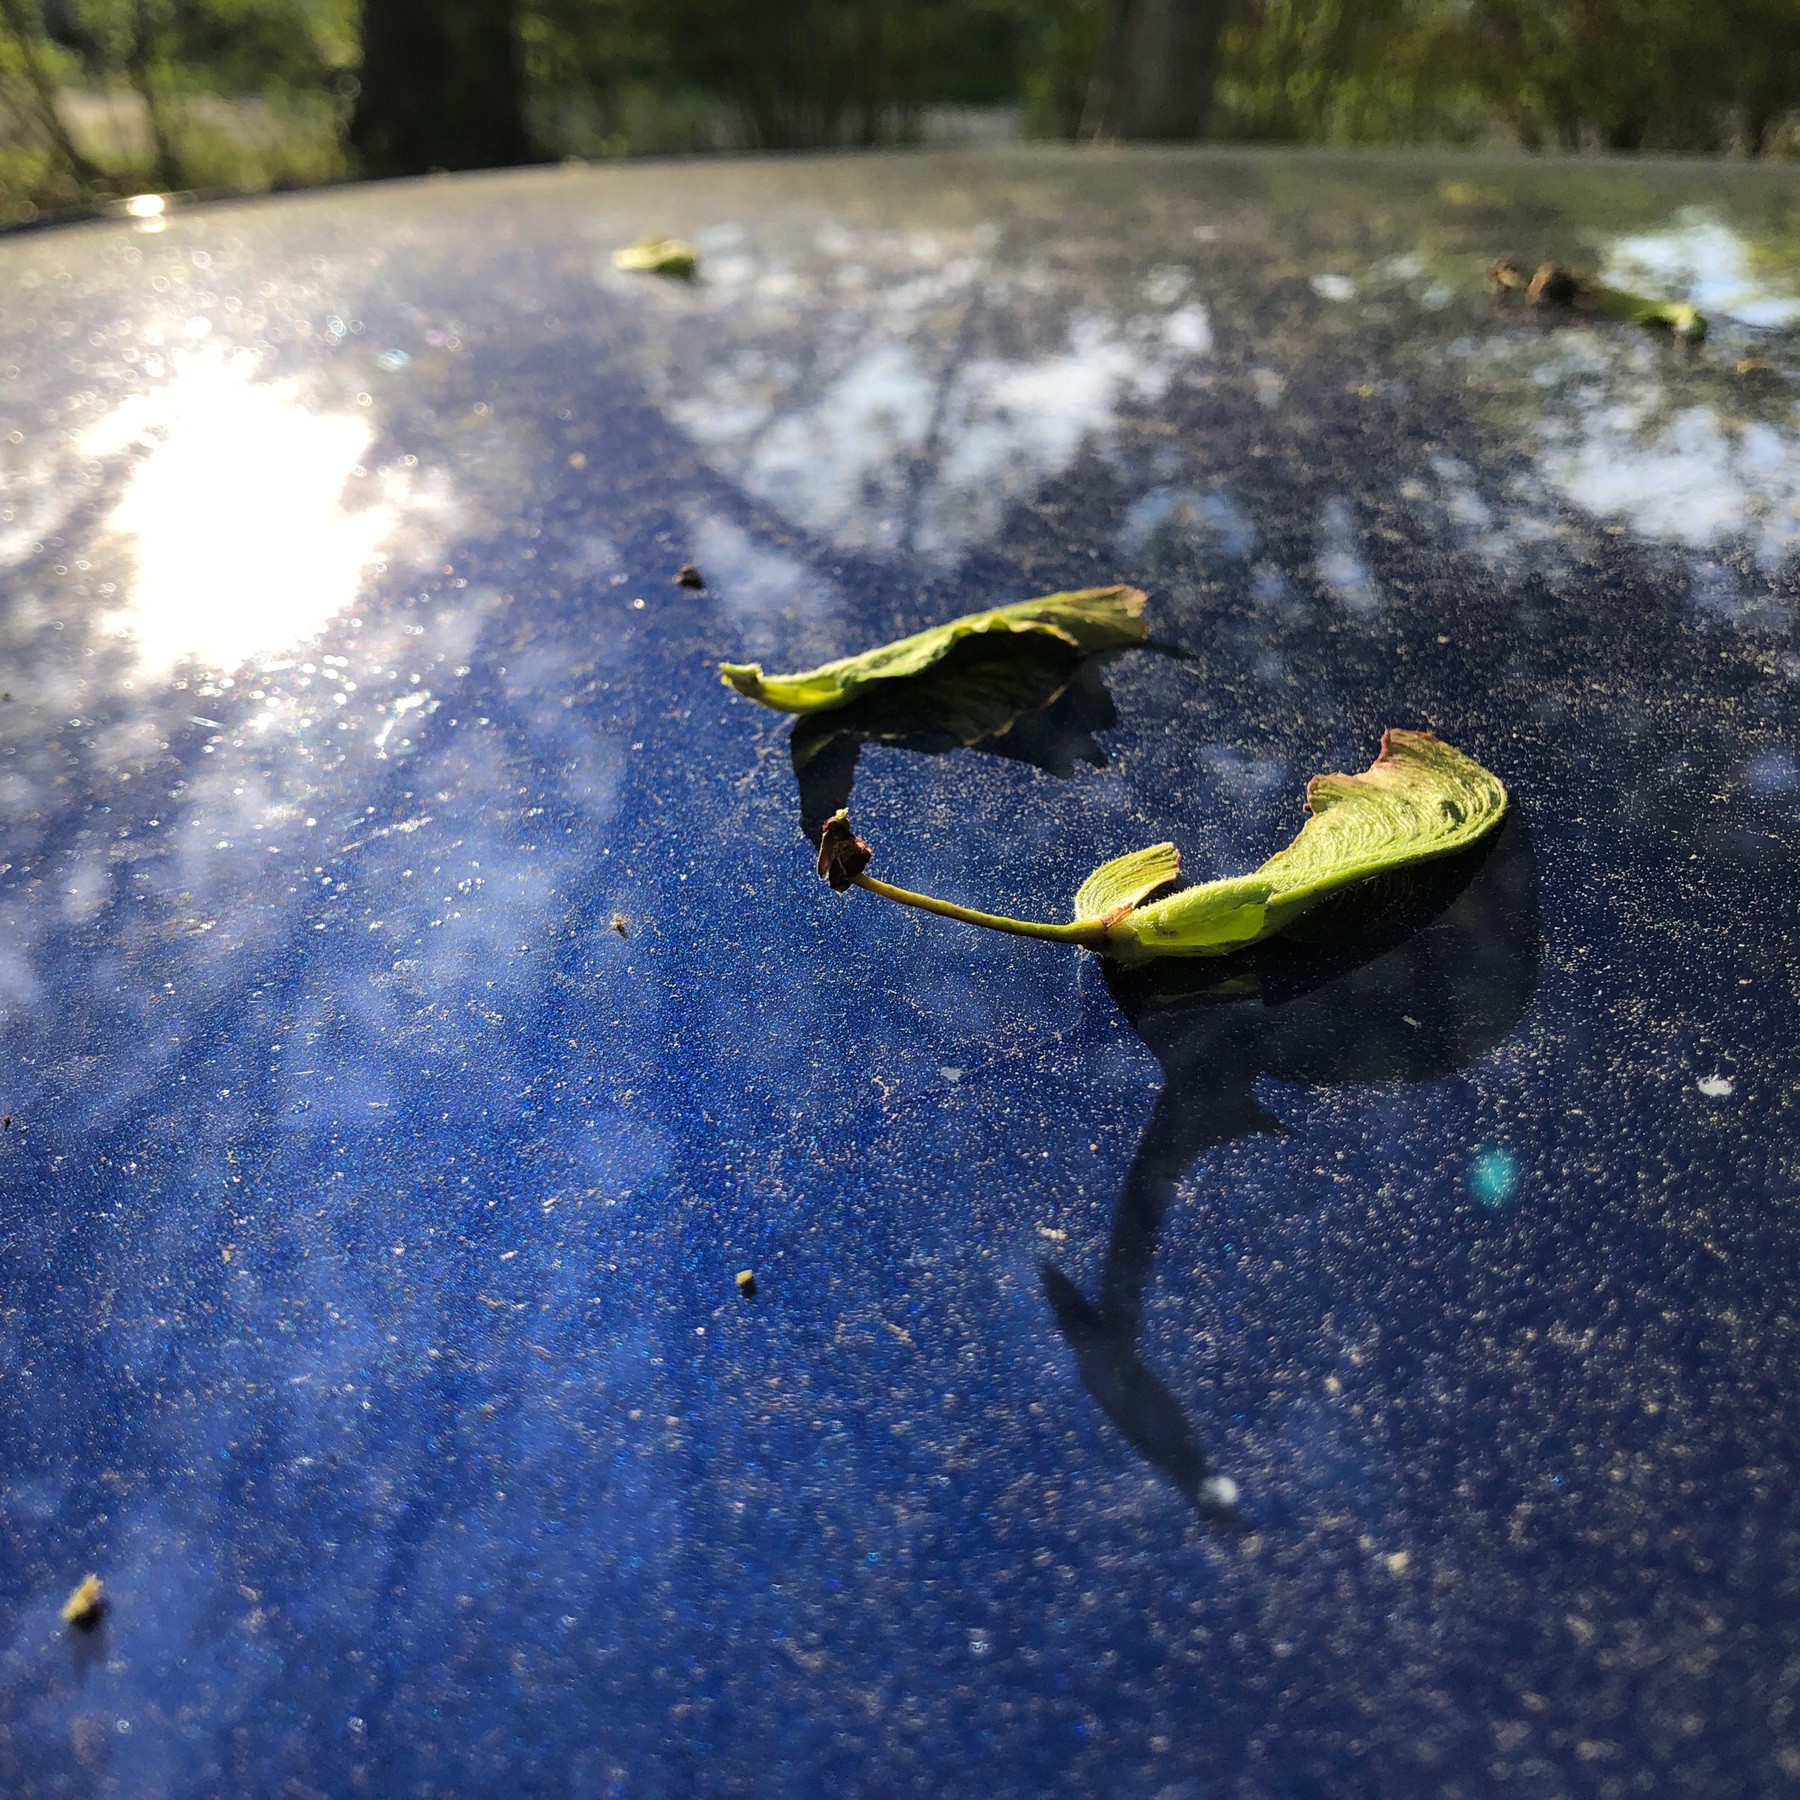 Seeds and pollen on blue car roof.